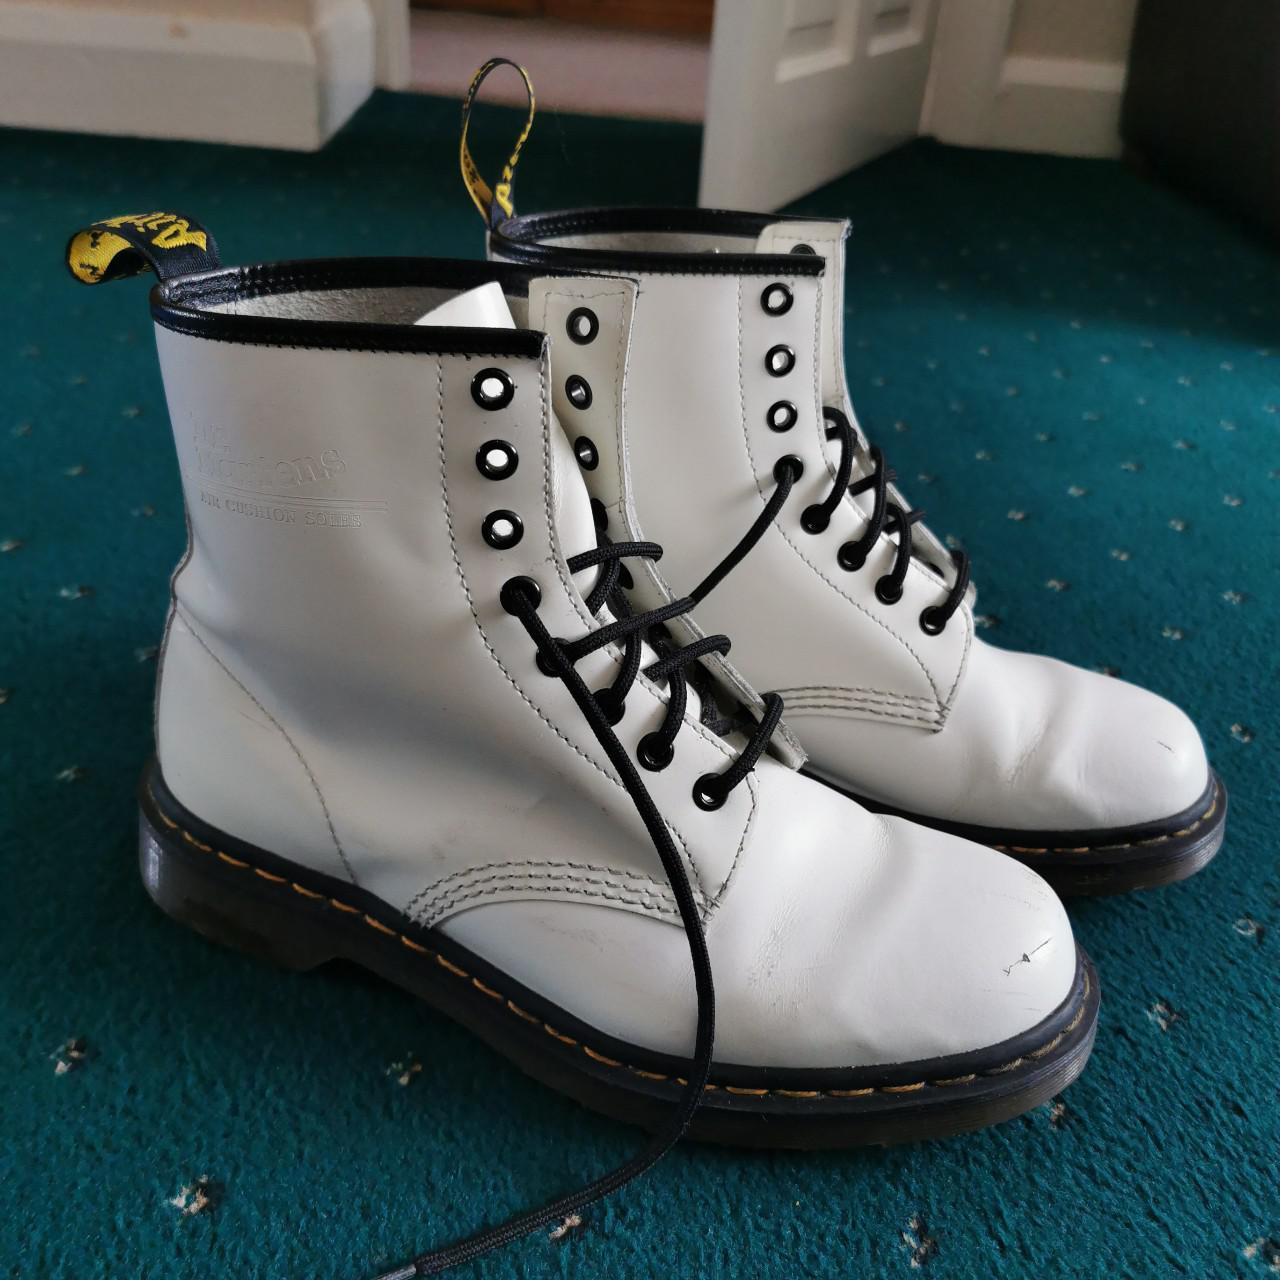 Dr Martens 1460 air cushion soles in white leather,... - Depop